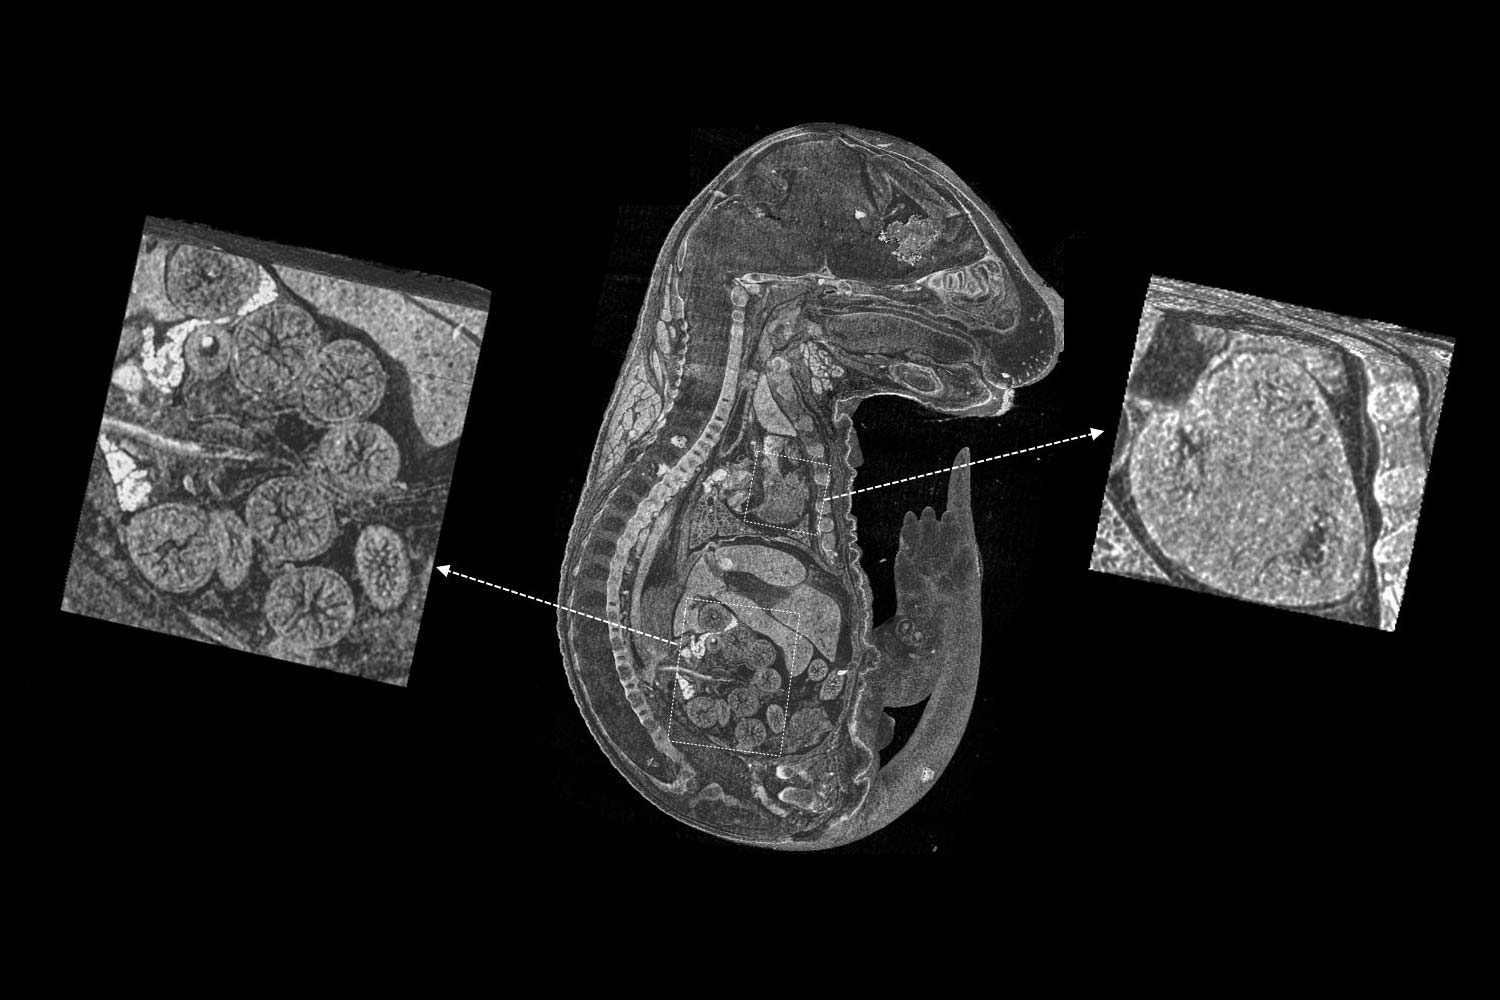 Unstained mouse embryo imaged with ZEISS Xradia Versa with high contrast capability Courtesy of Dr. Yukako Yagi, Massachusetts General Hospital, USA